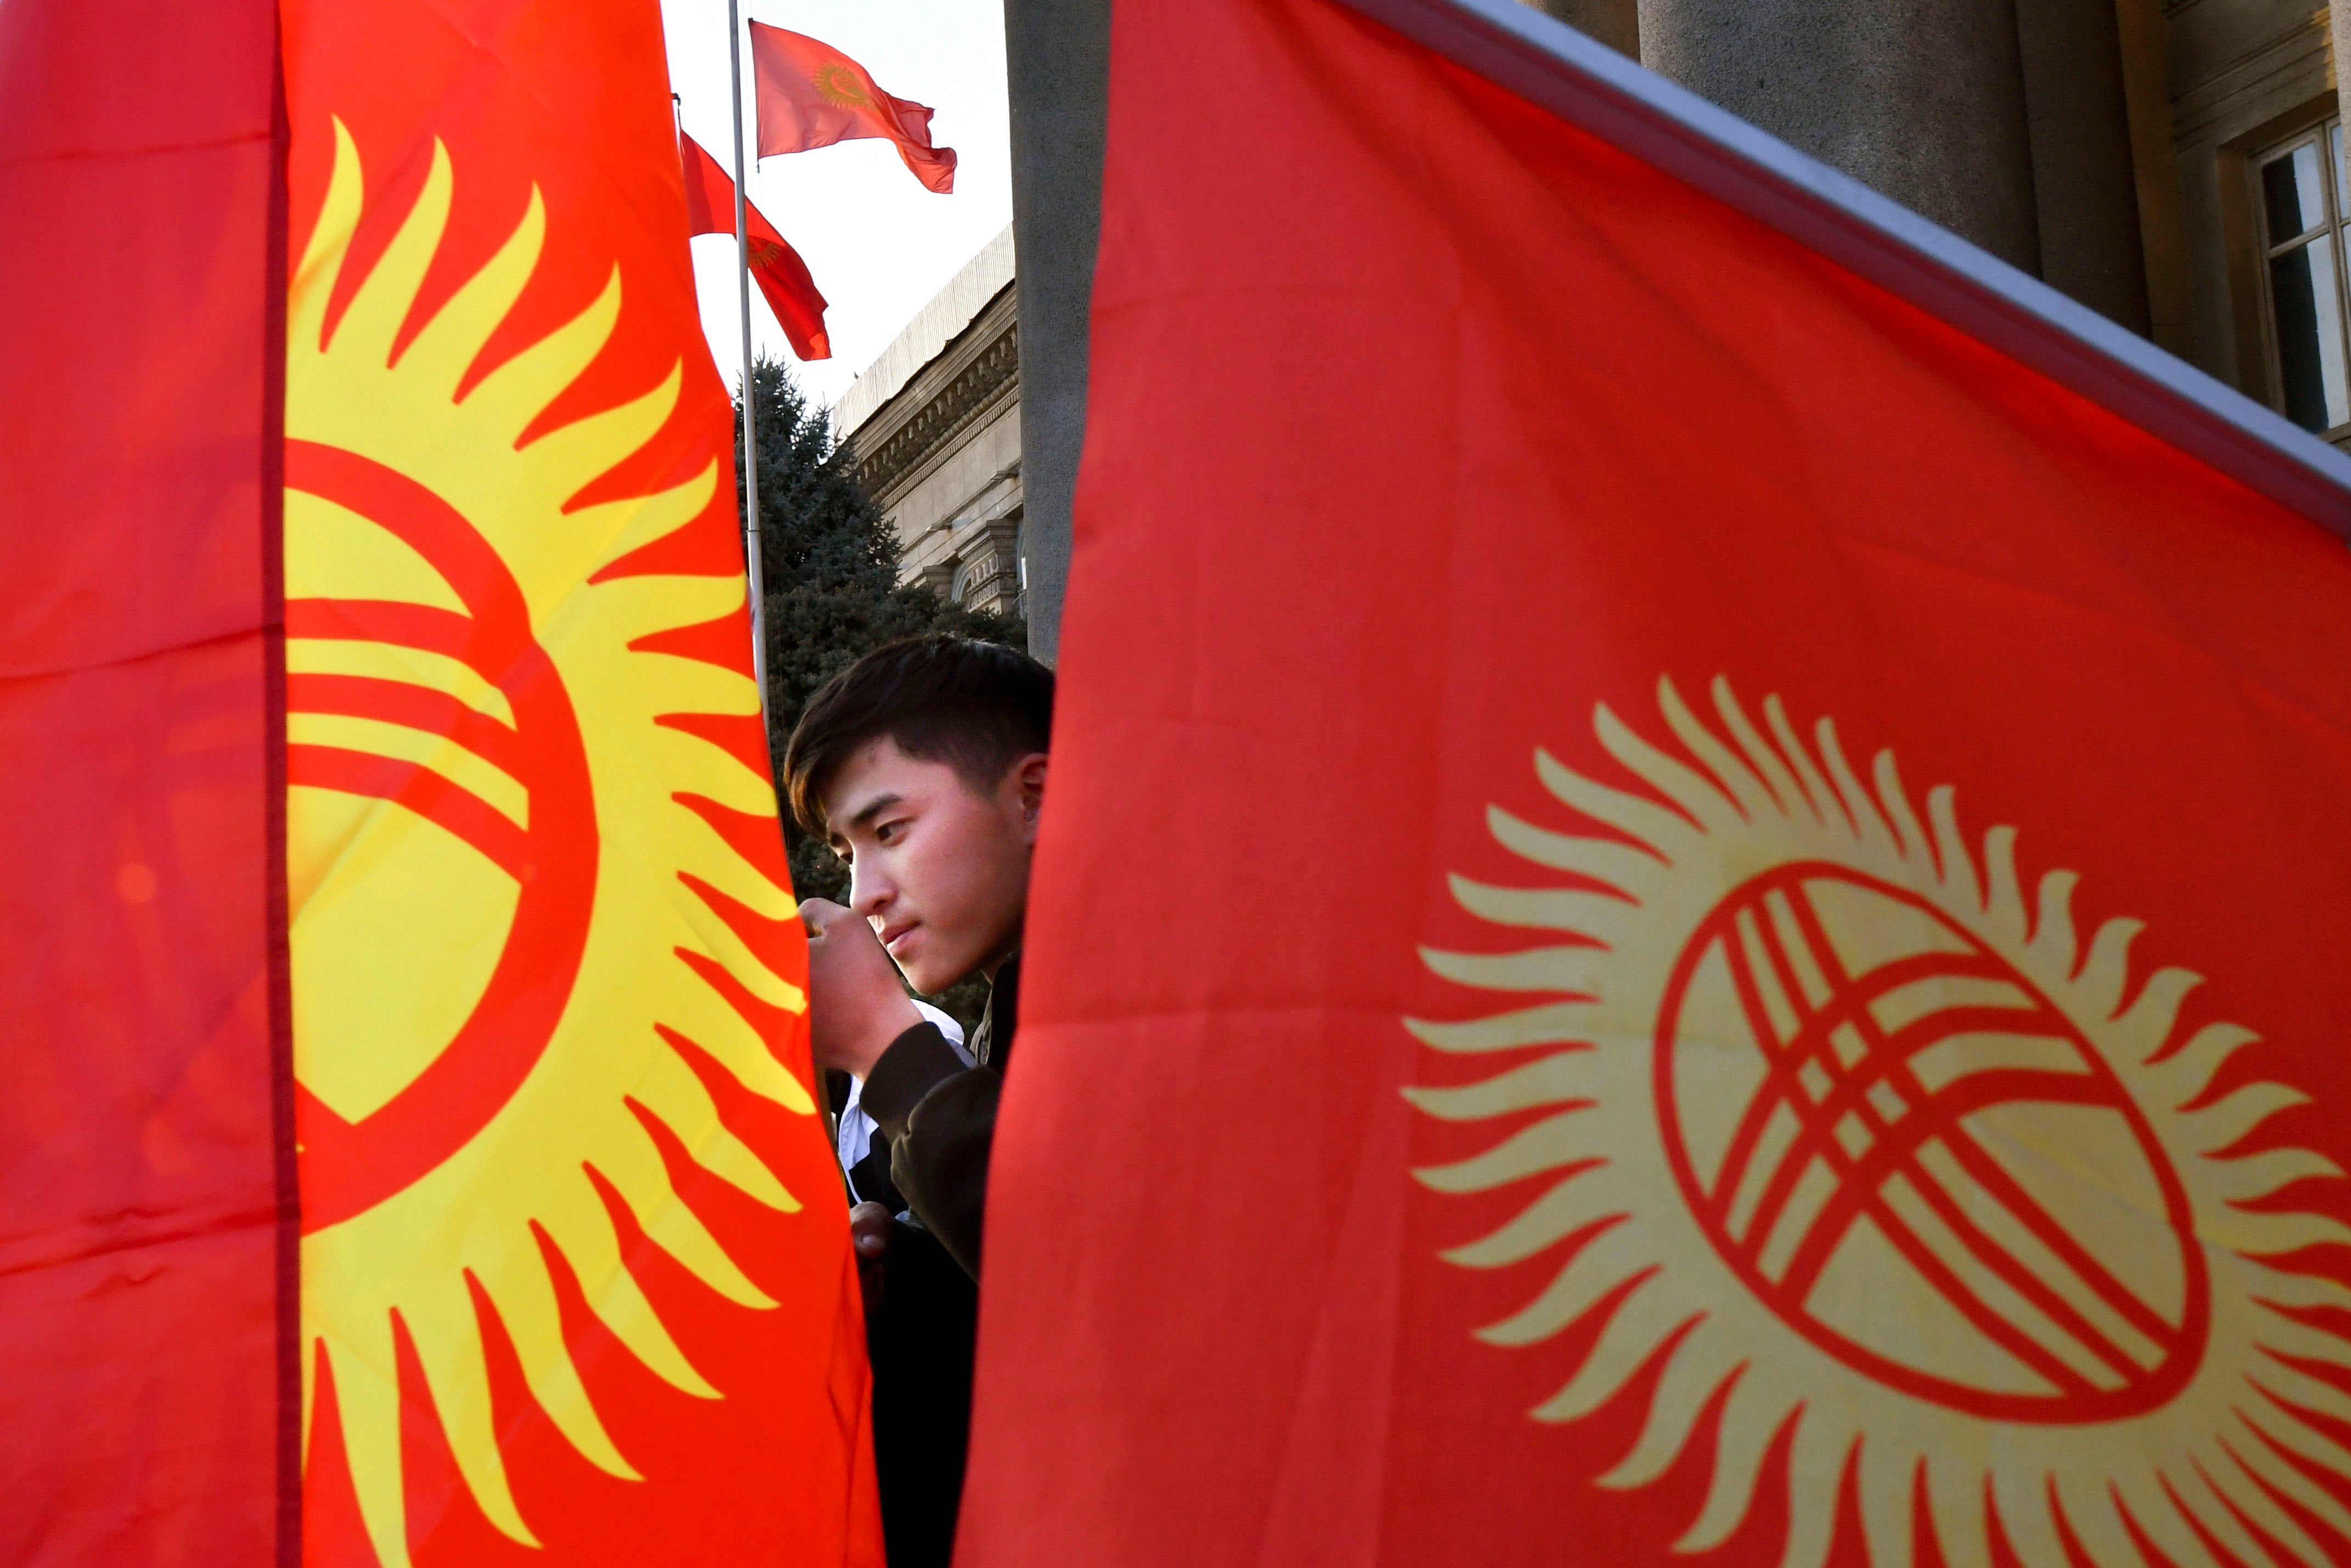 A protester listens to a speaker during a rally in front of the government building in Bishkek, Kyrgyzstan, Wednesday, October 14, 2020. 